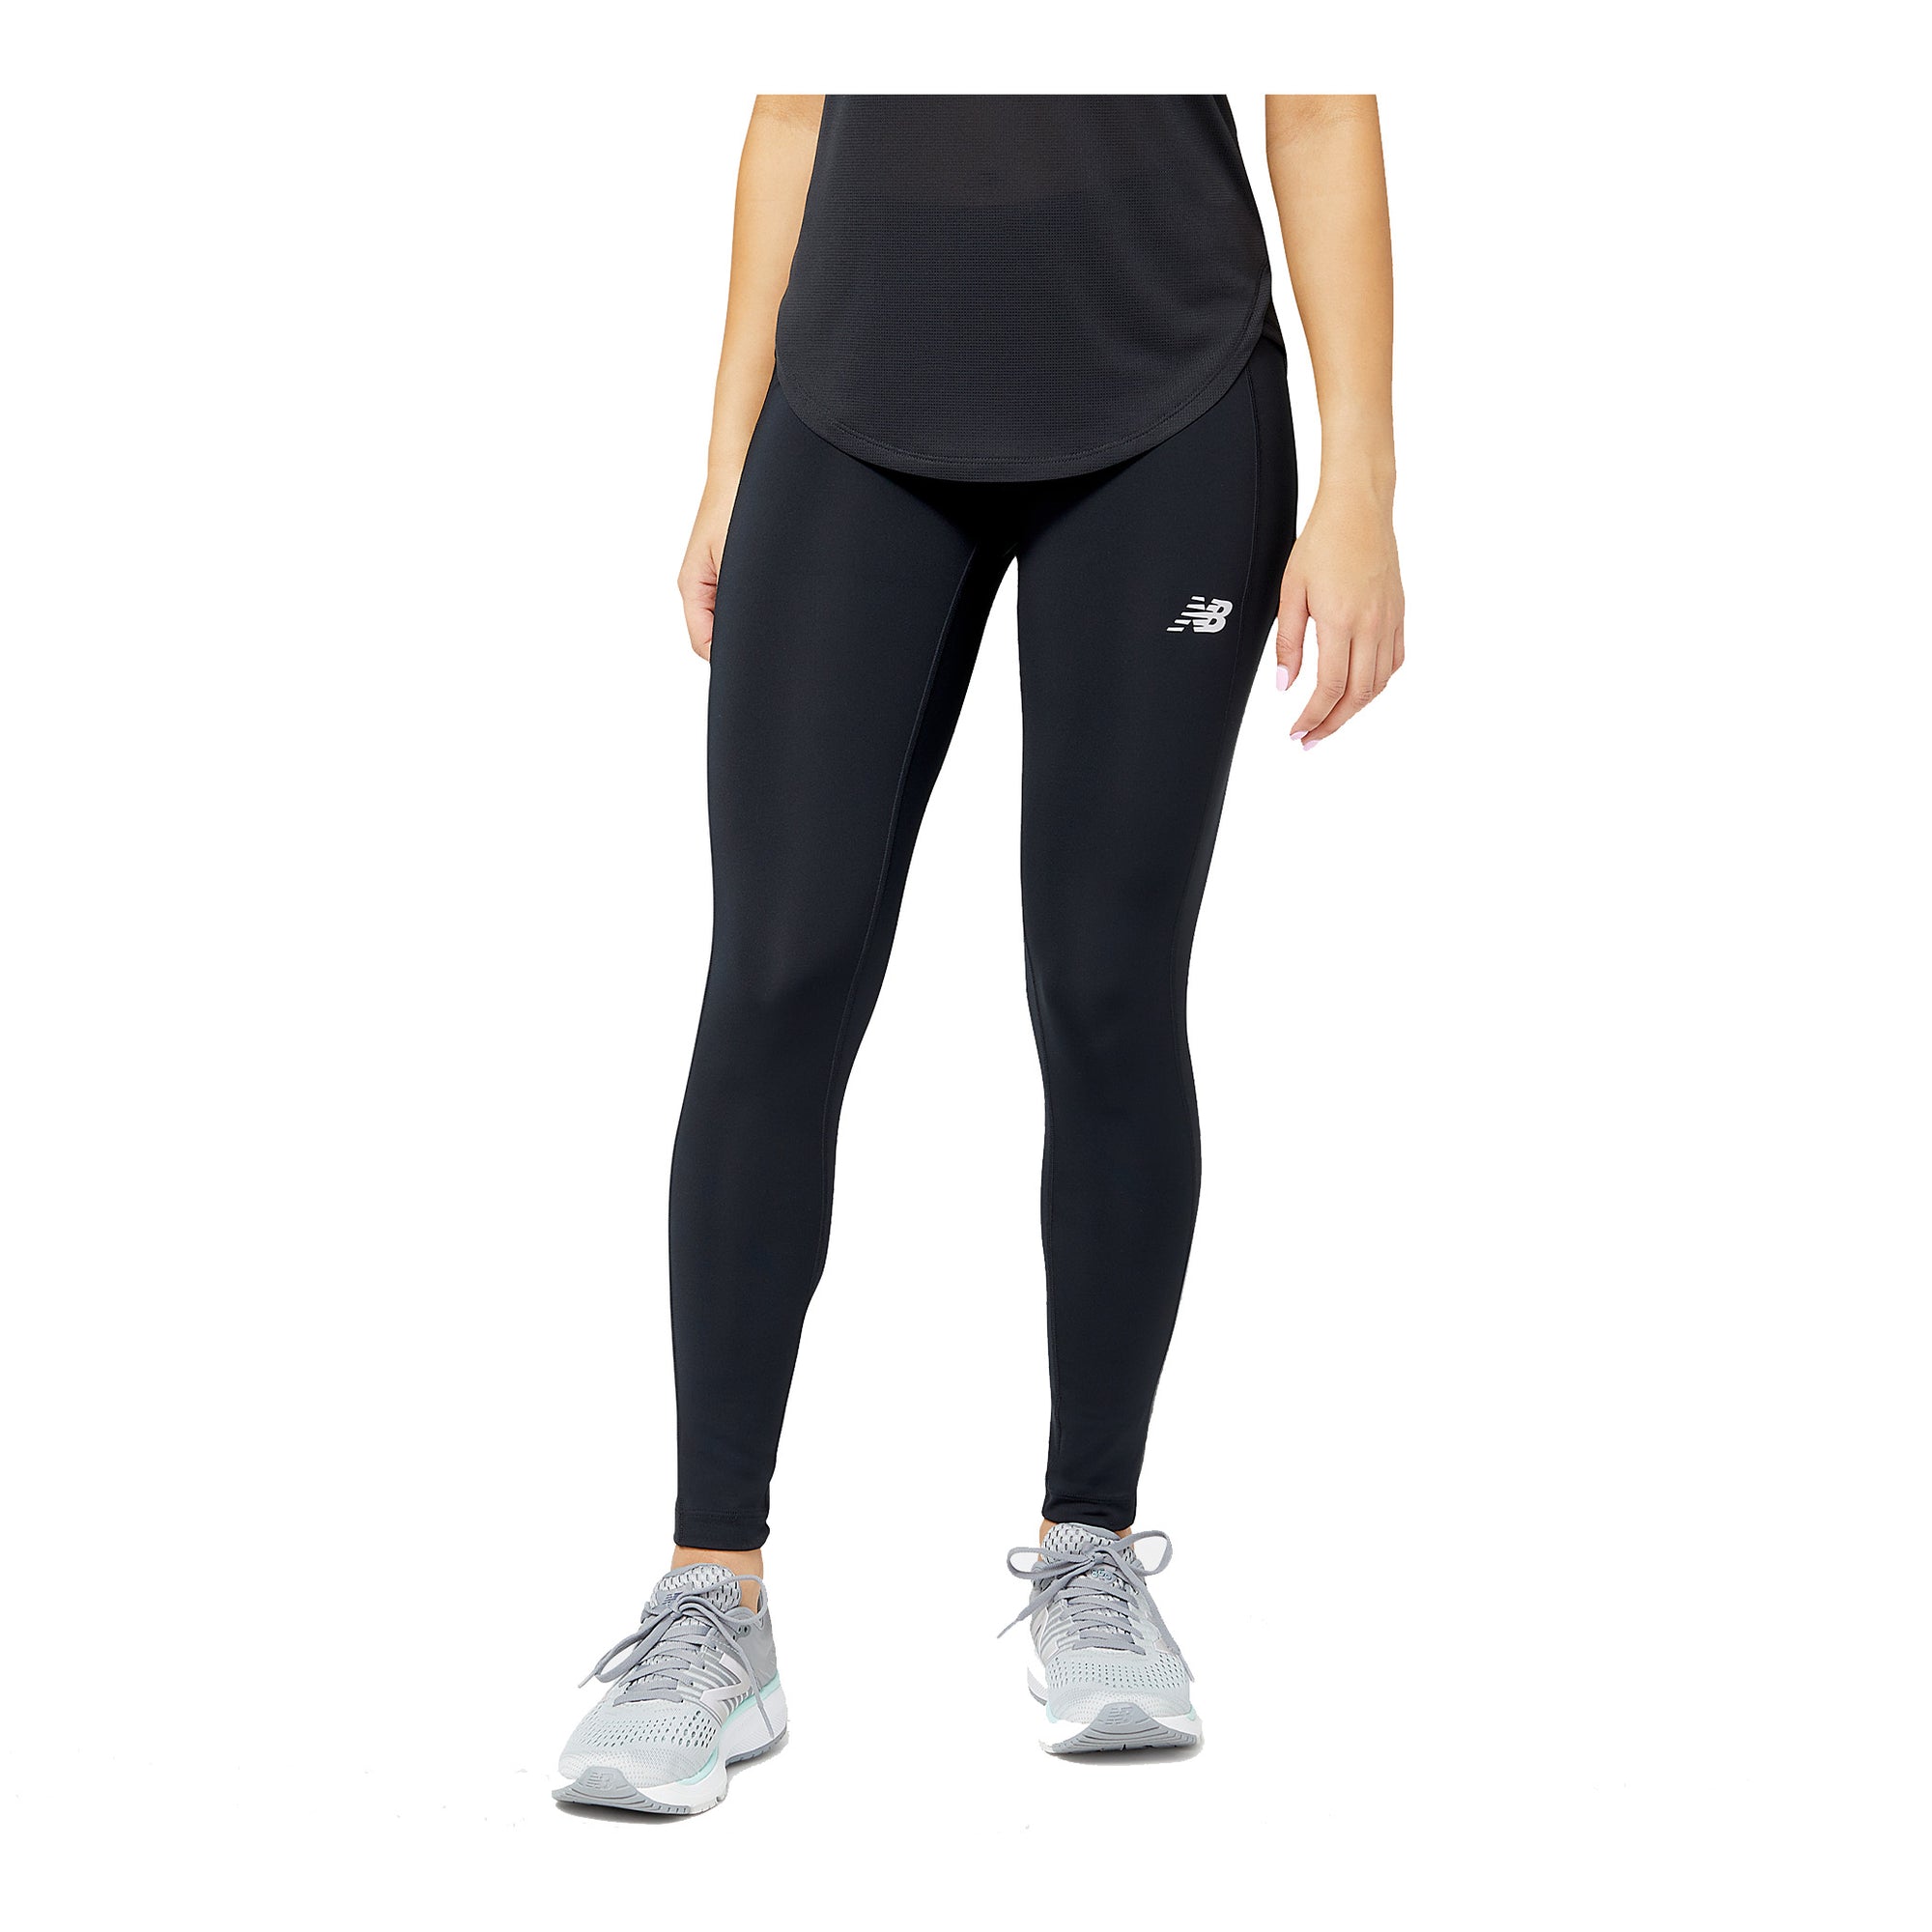 NEW BALANCE ACCELERATE TIGHT - FEMME